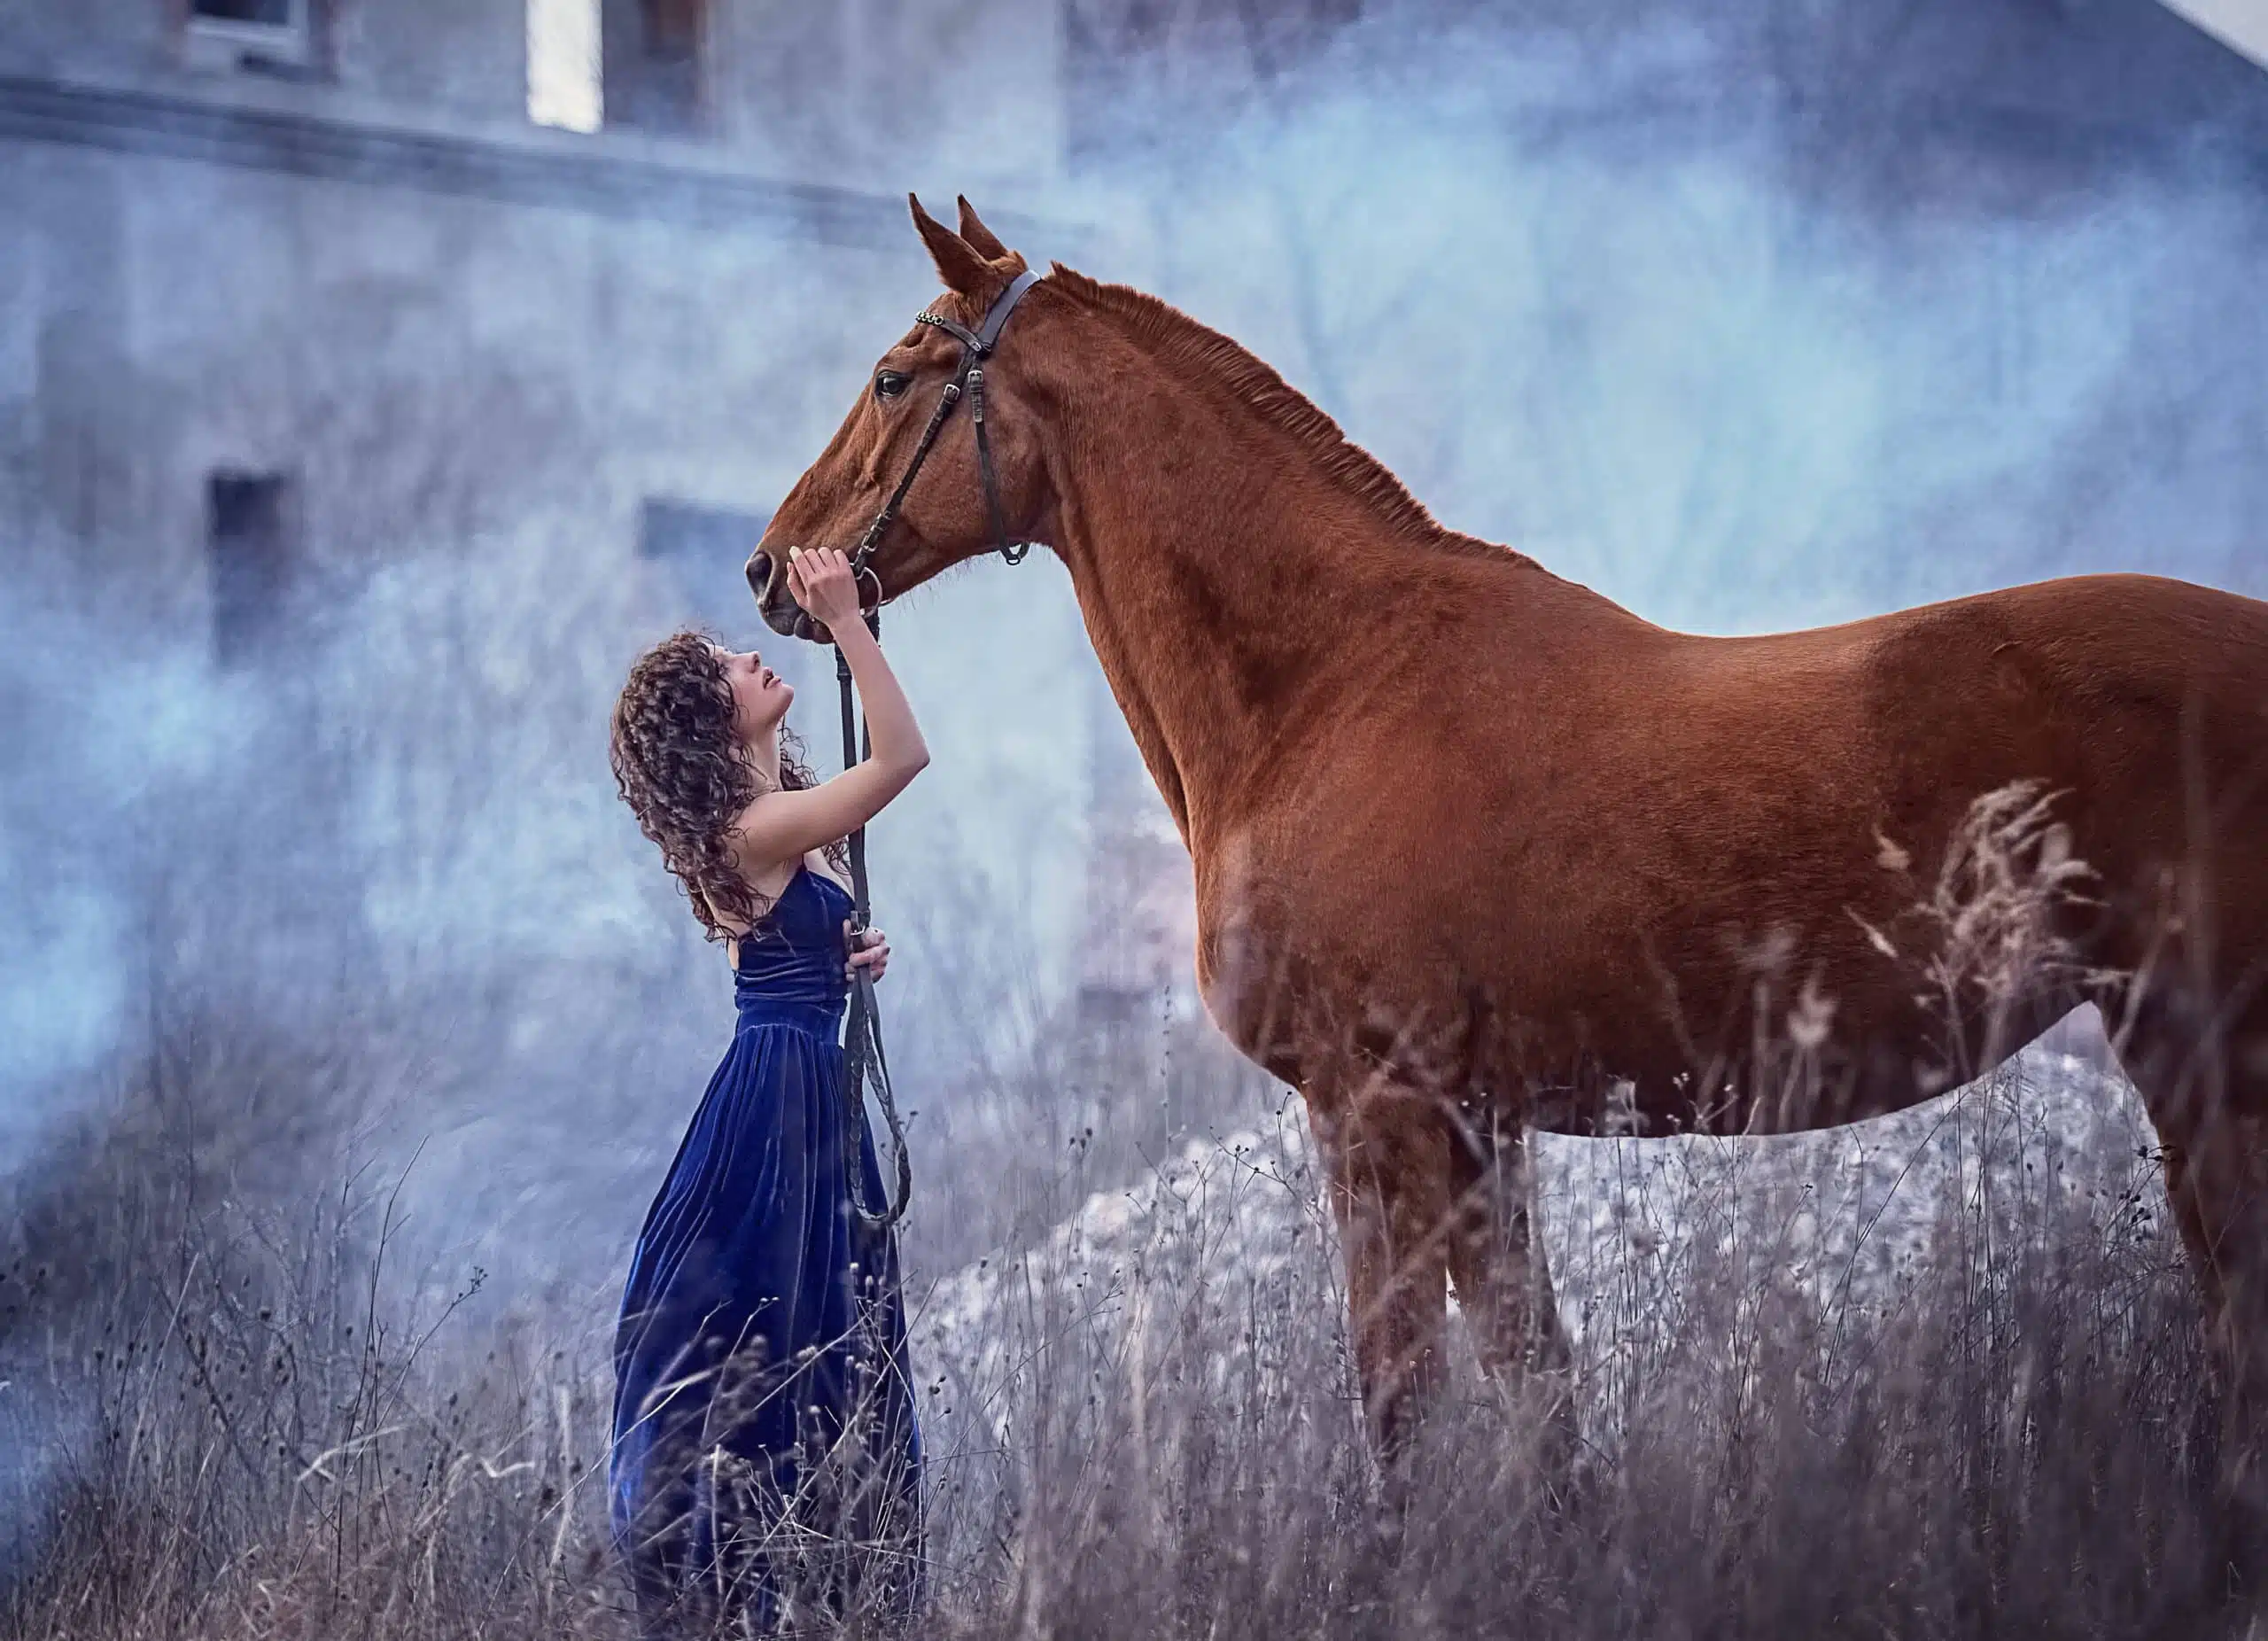 A beautiful curly-haired girl in a blue dress stands next to a red horse.